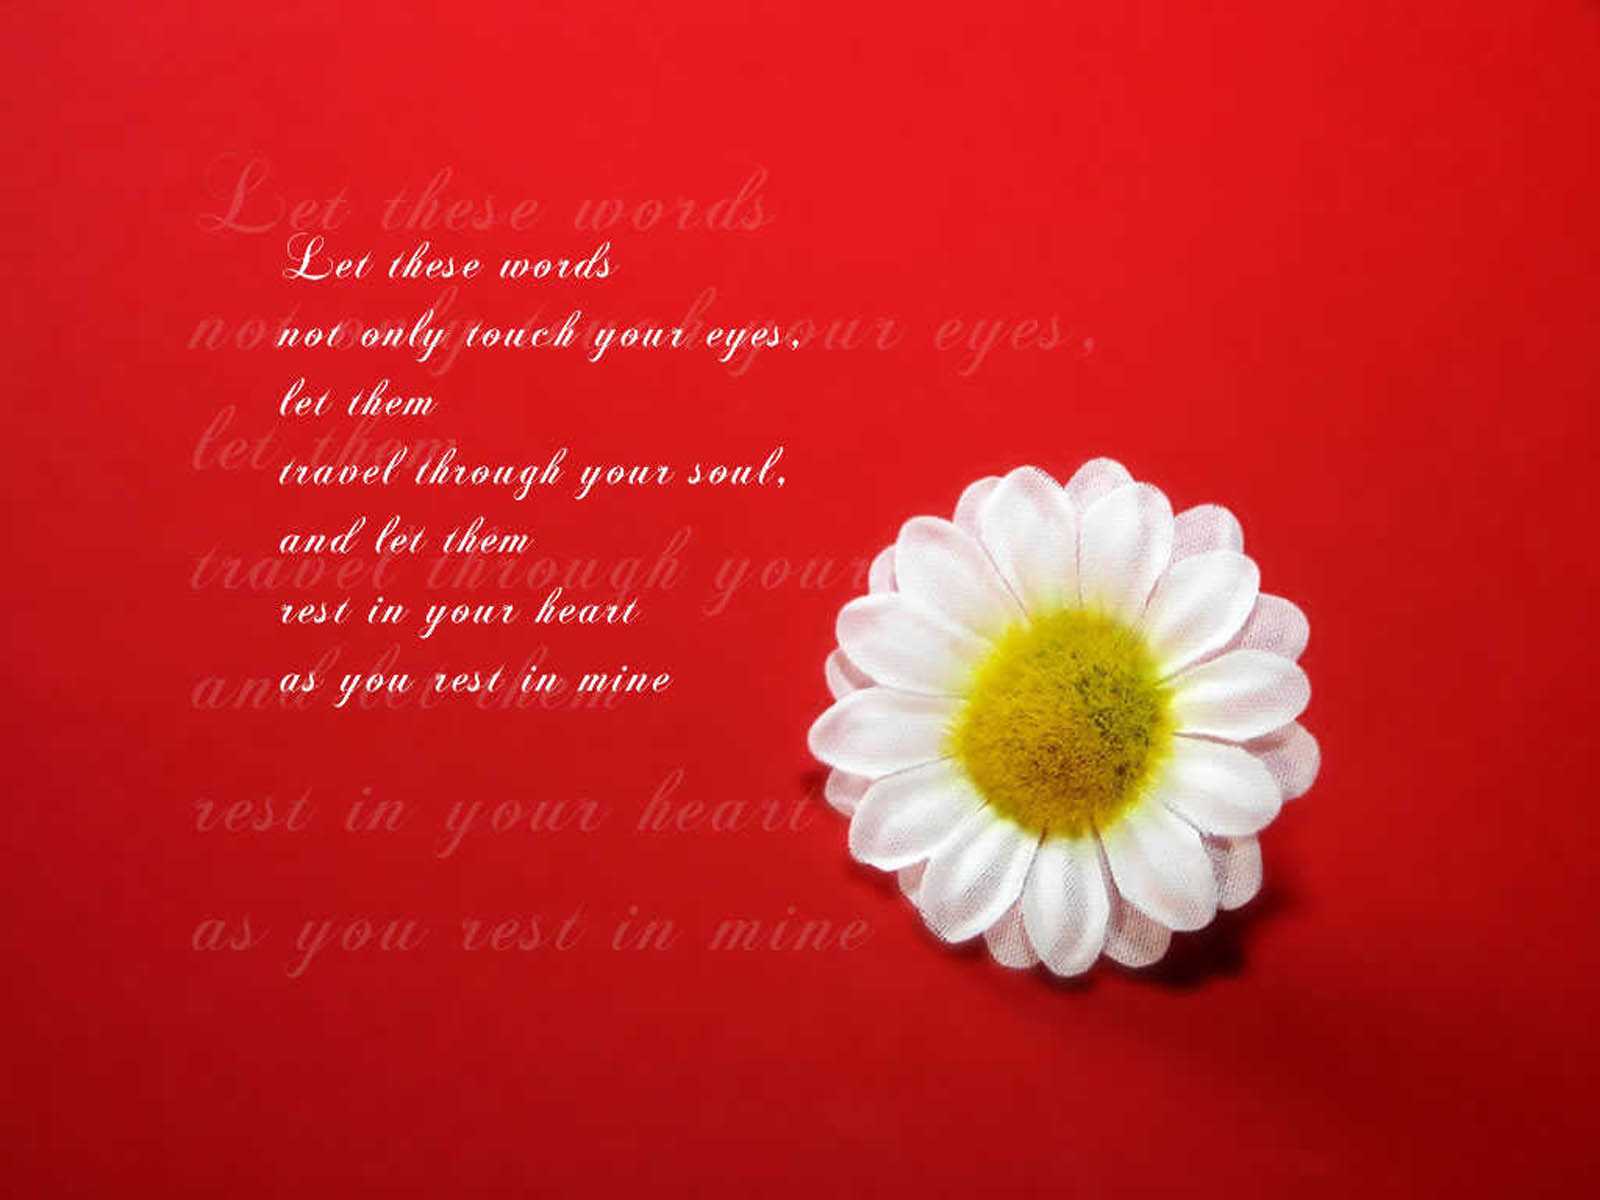 Tag Love Quotes Wallpapers BackgroundsPhotos Images and Pictures 1600x1200